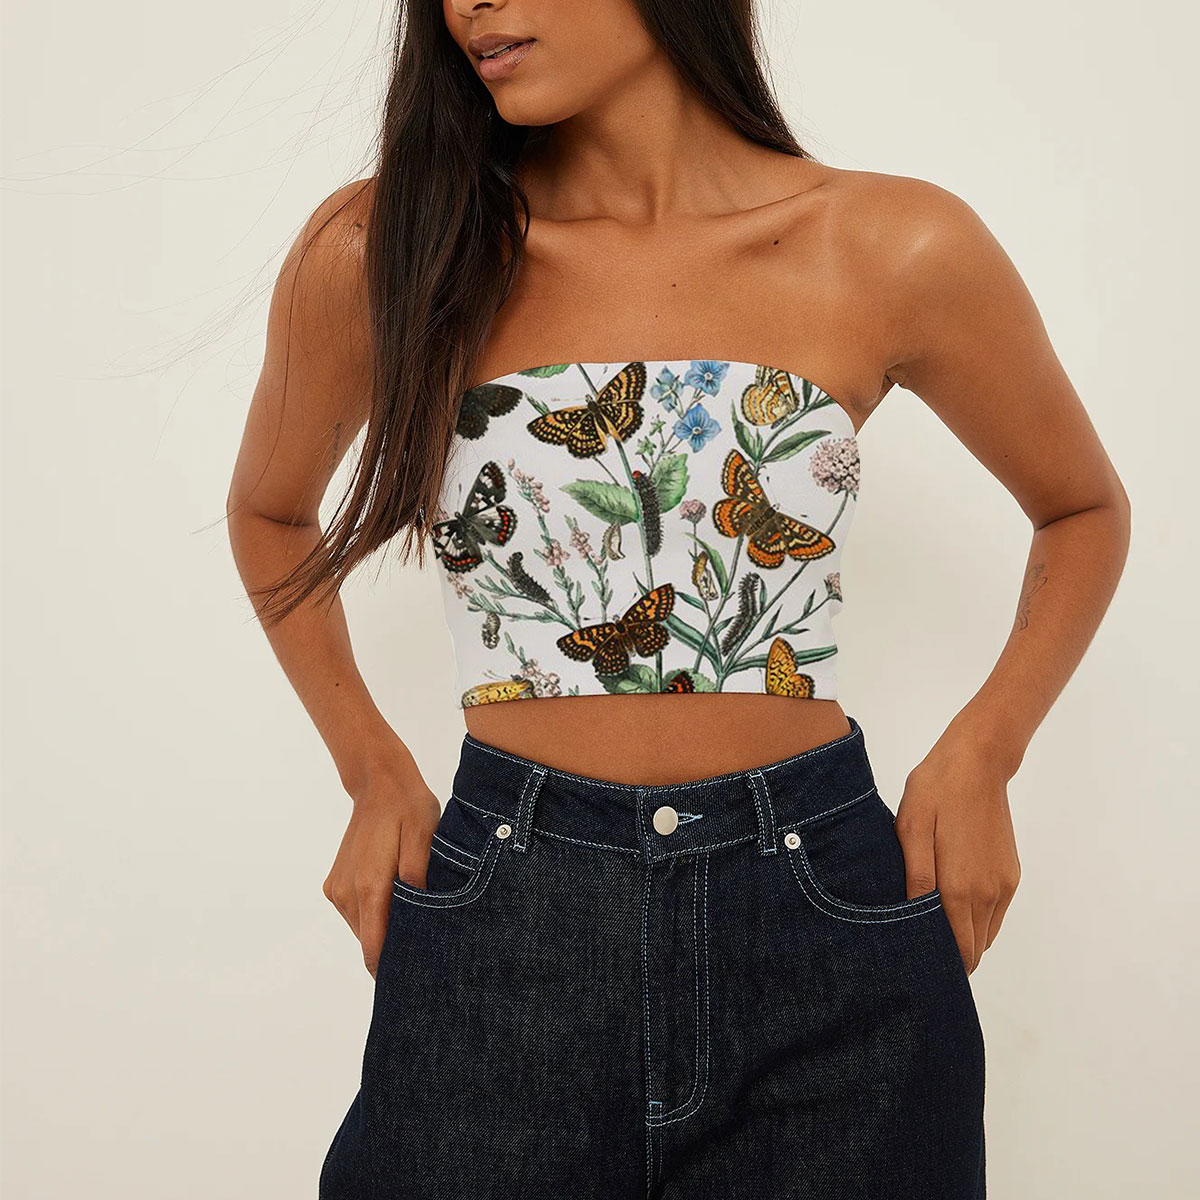 Vintage Butterfly 2 Tube Top